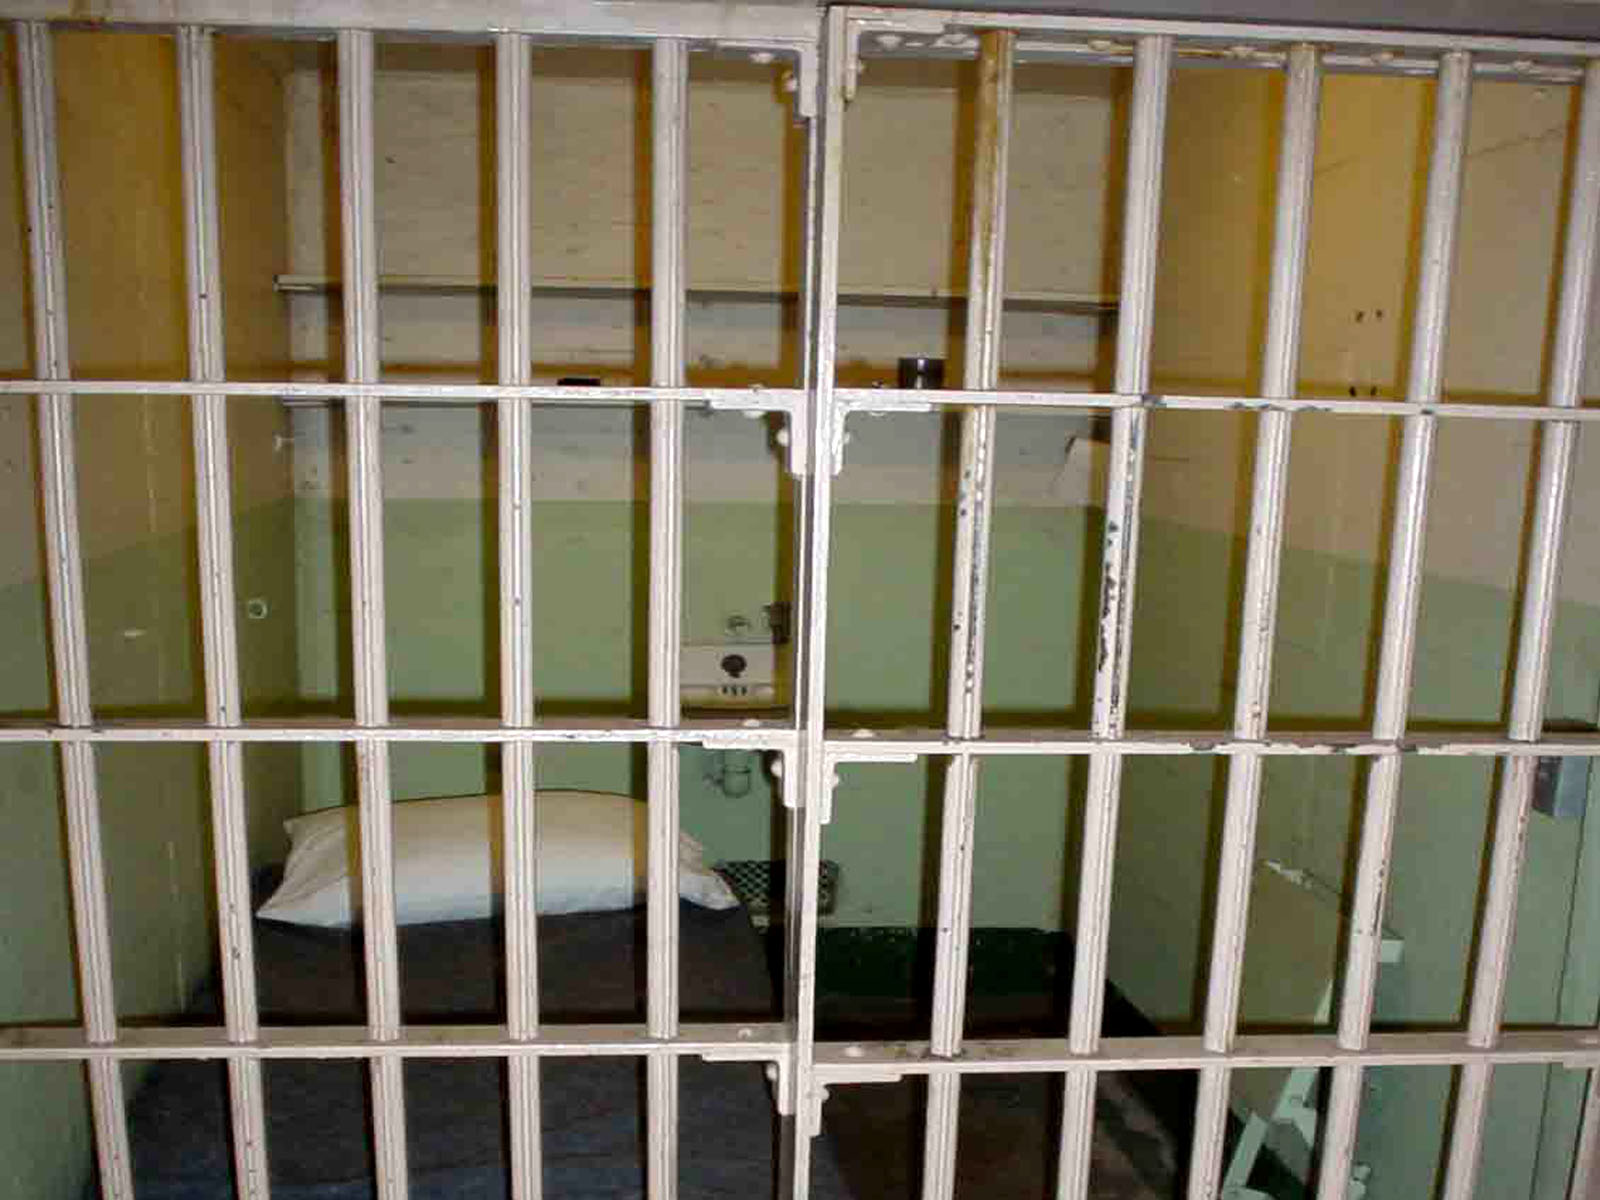 Jail Cell Wallpaper Displaying Image For